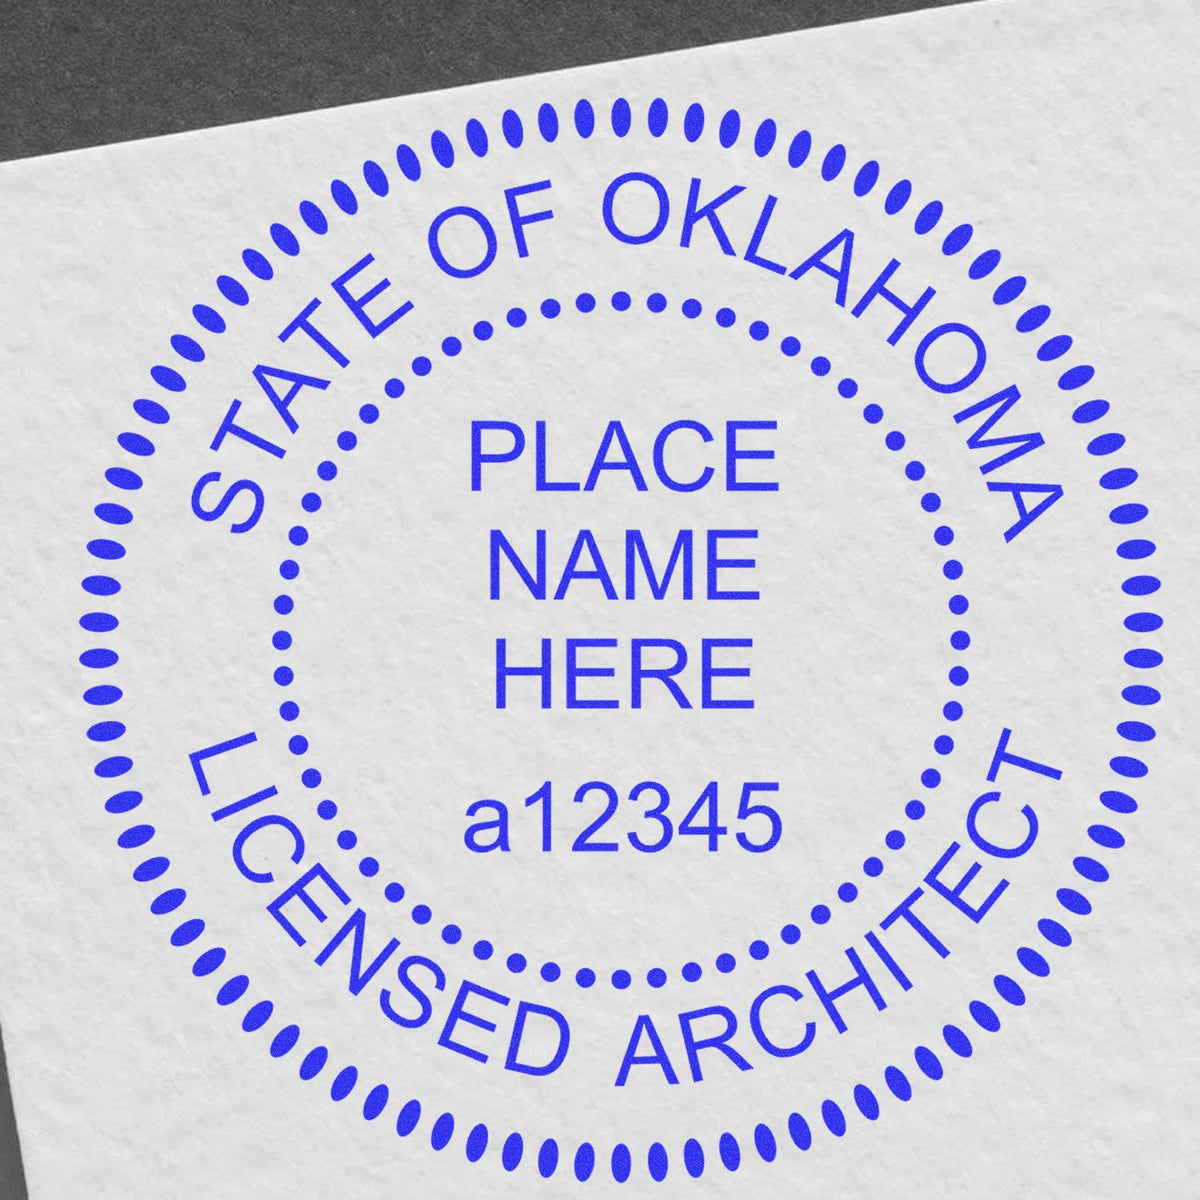 Slim Pre-Inked Oklahoma Architect Seal Stamp in use photo showing a stamped imprint of the Slim Pre-Inked Oklahoma Architect Seal Stamp